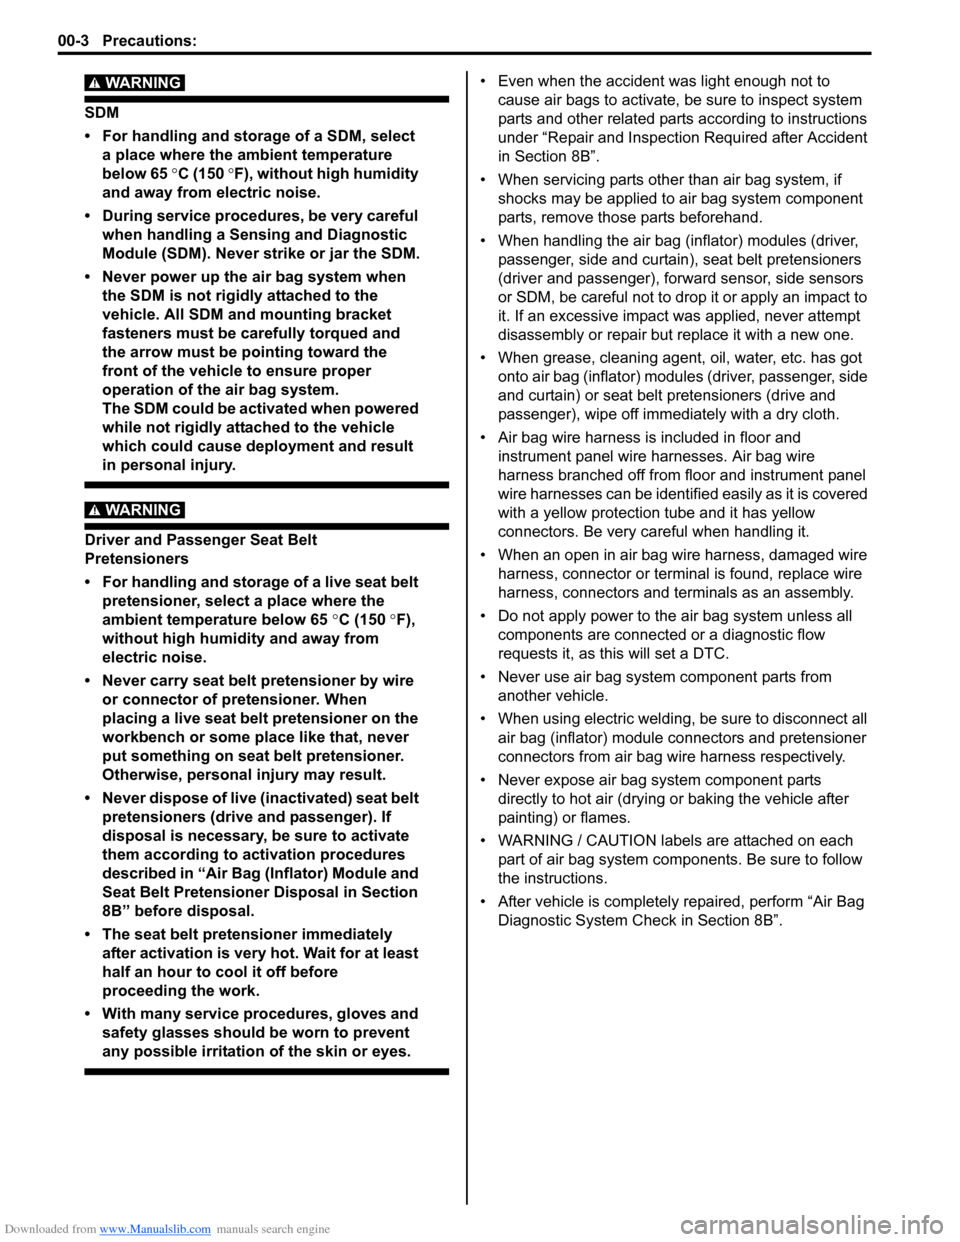 SUZUKI SWIFT 2006 2.G Service Workshop Manual Downloaded from www.Manualslib.com manuals search engine 00-3 Precautions: 
WARNING! 
SDM
• For handling and storage of a SDM, select a place where the ambient temperature 
below 65  °C (150  °F),